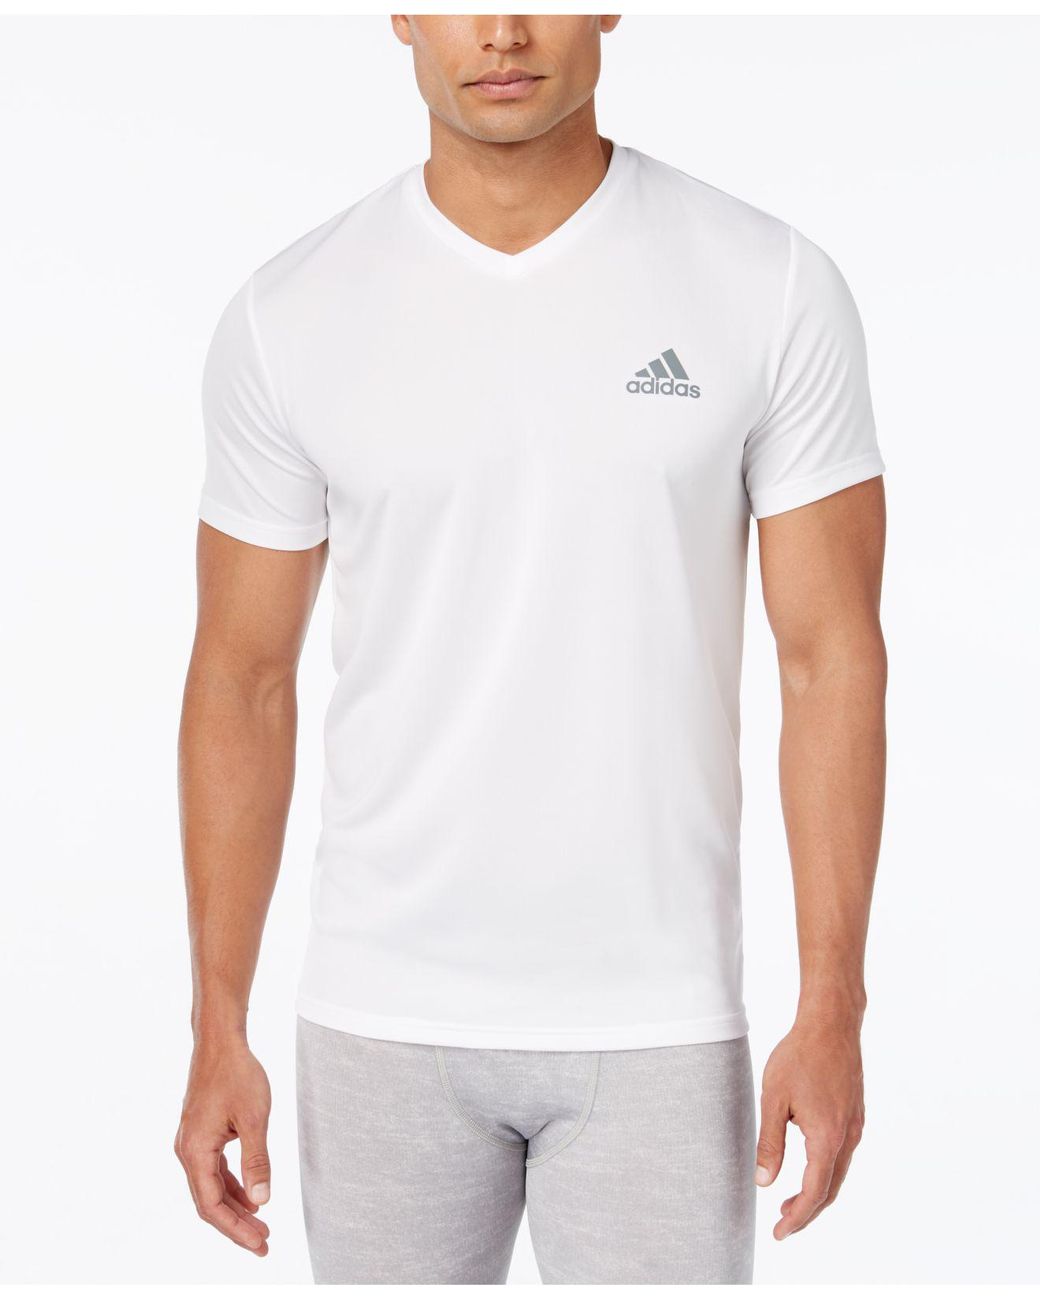 Adidas Mens Crew Neck T-Shirt Short Sleeves Climalite Ultimate TEE